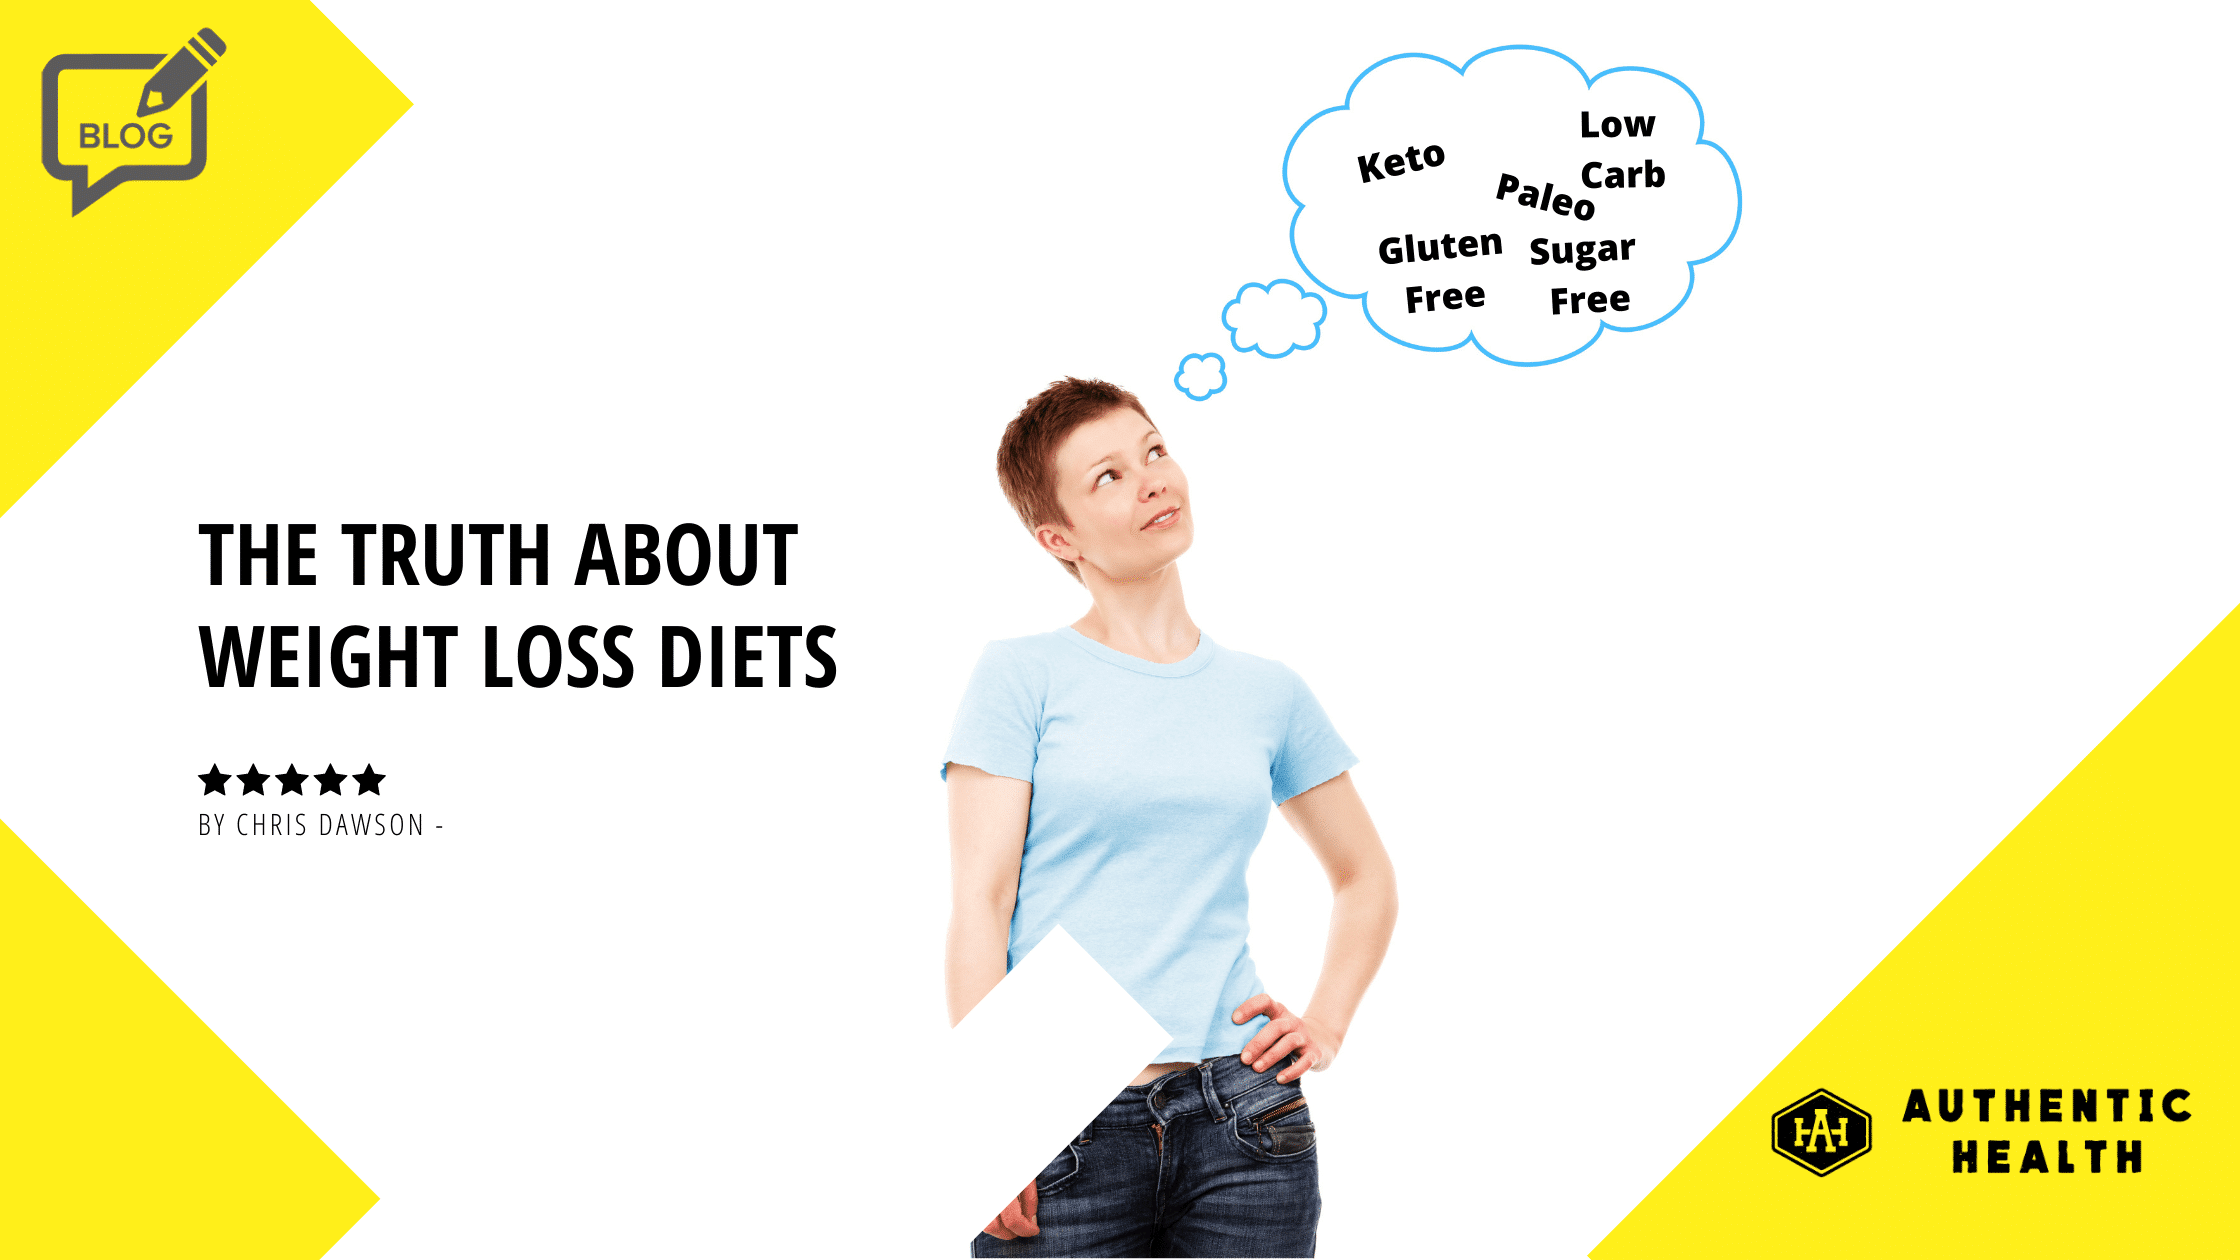 The truth about weight loss diets - Woman thinking